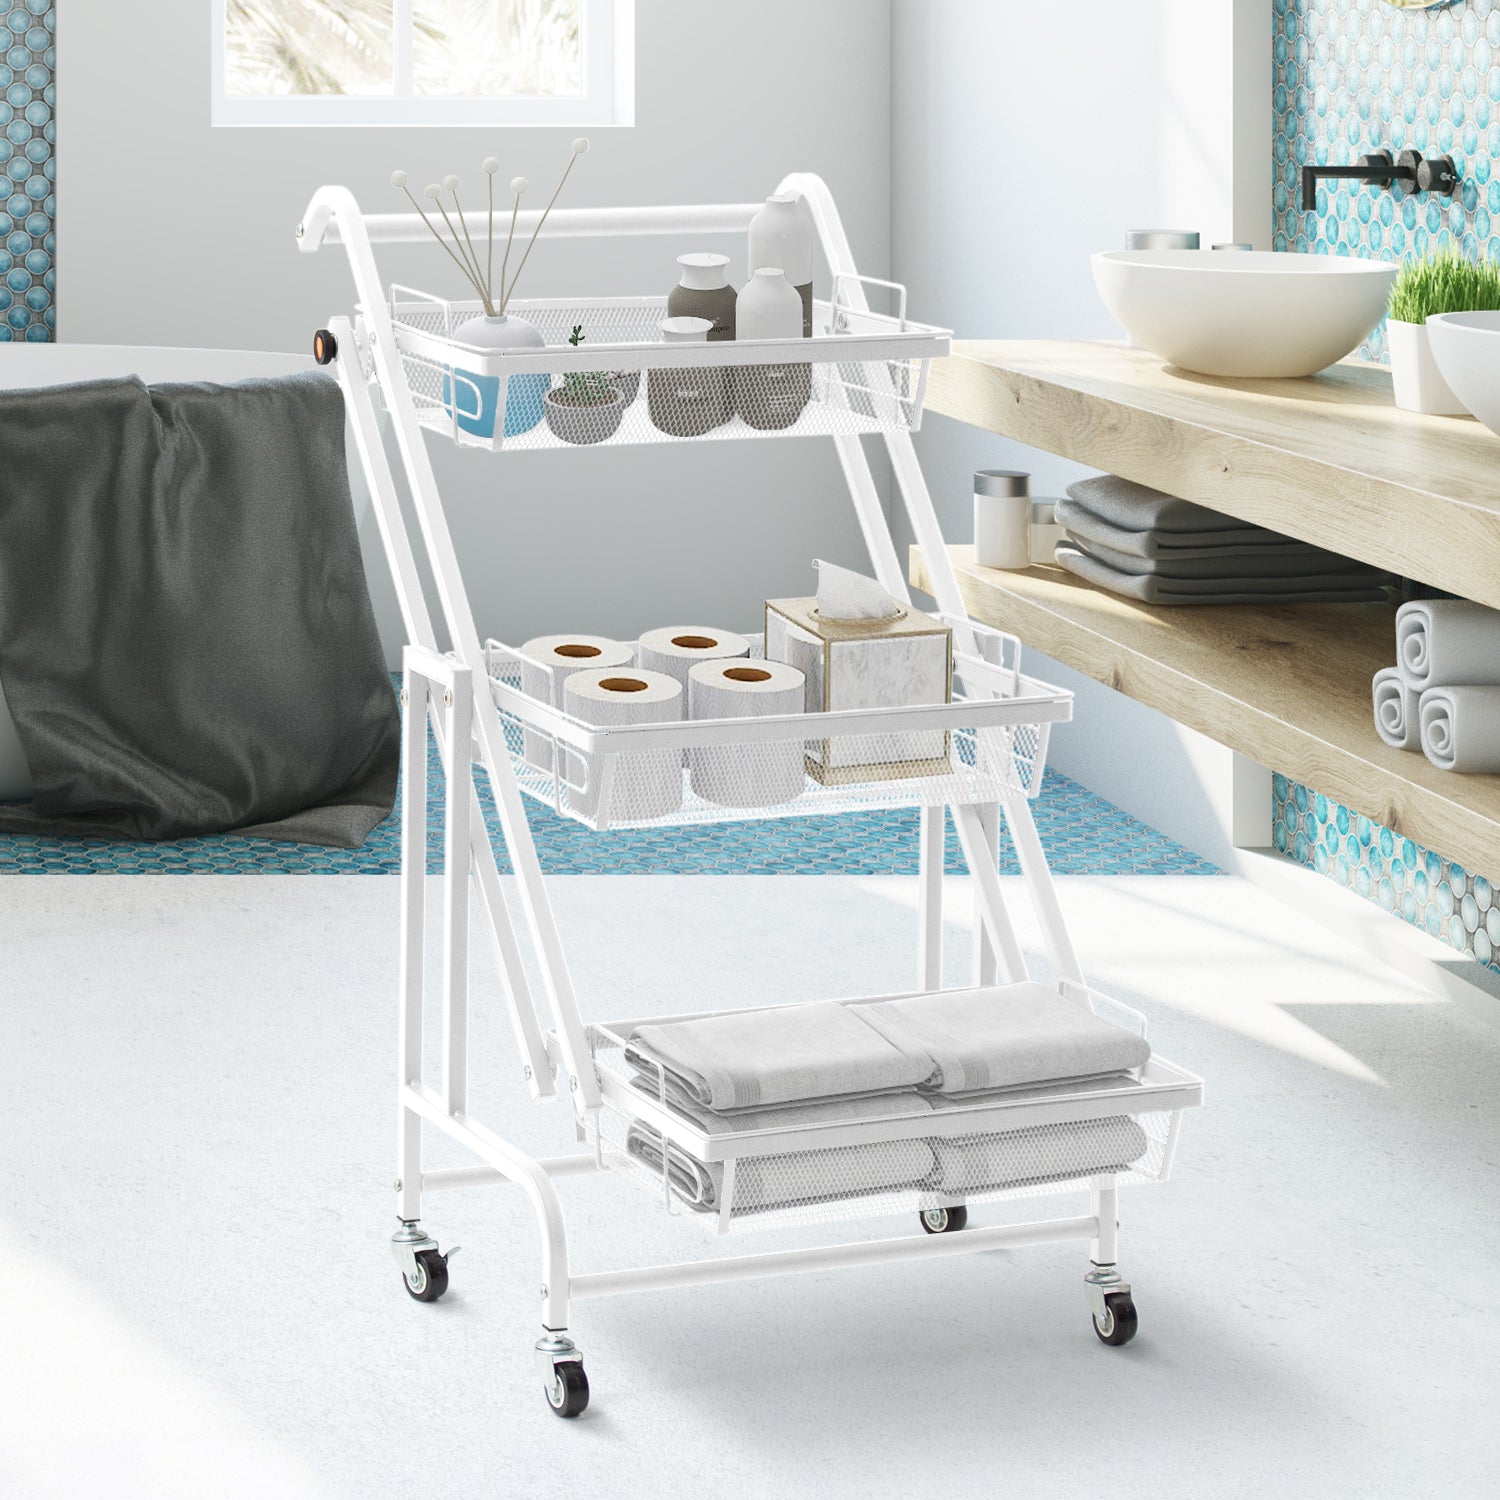 Todeco-Trolley-on-Wheels-Kitchen-Trolley-with-3-Levels-90-180-Adjustable-Angle-Kitchen-Trolley-with-Removable-Tray-for-Kitchen-Office-Bathroom-Cloakroom-44-5-30-5-94-5-cm-White